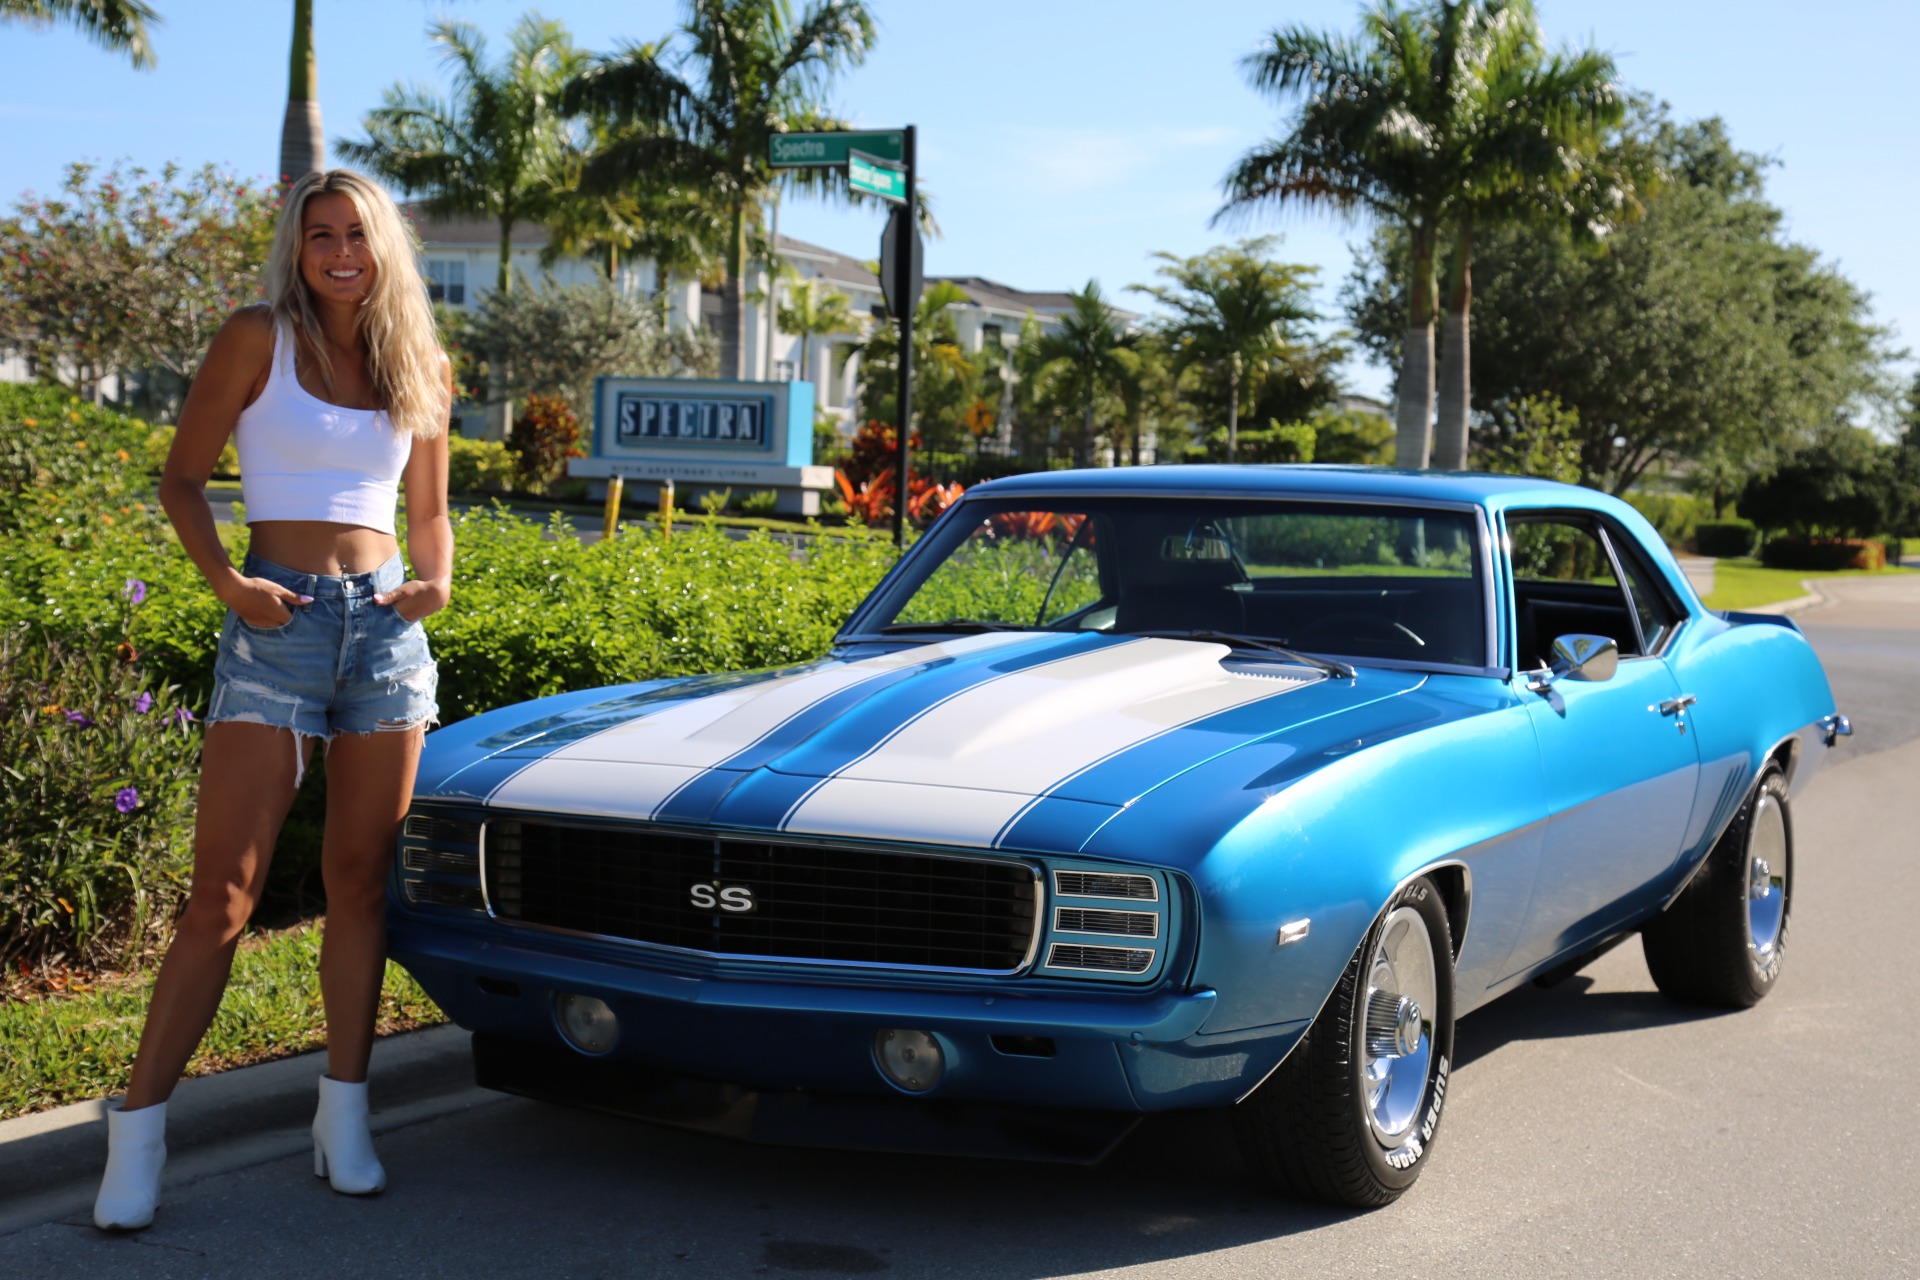 Used 1969 Chevrolet Camaro V8 Auto for sale Sold at Muscle Cars for Sale Inc. in Fort Myers FL 33912 2